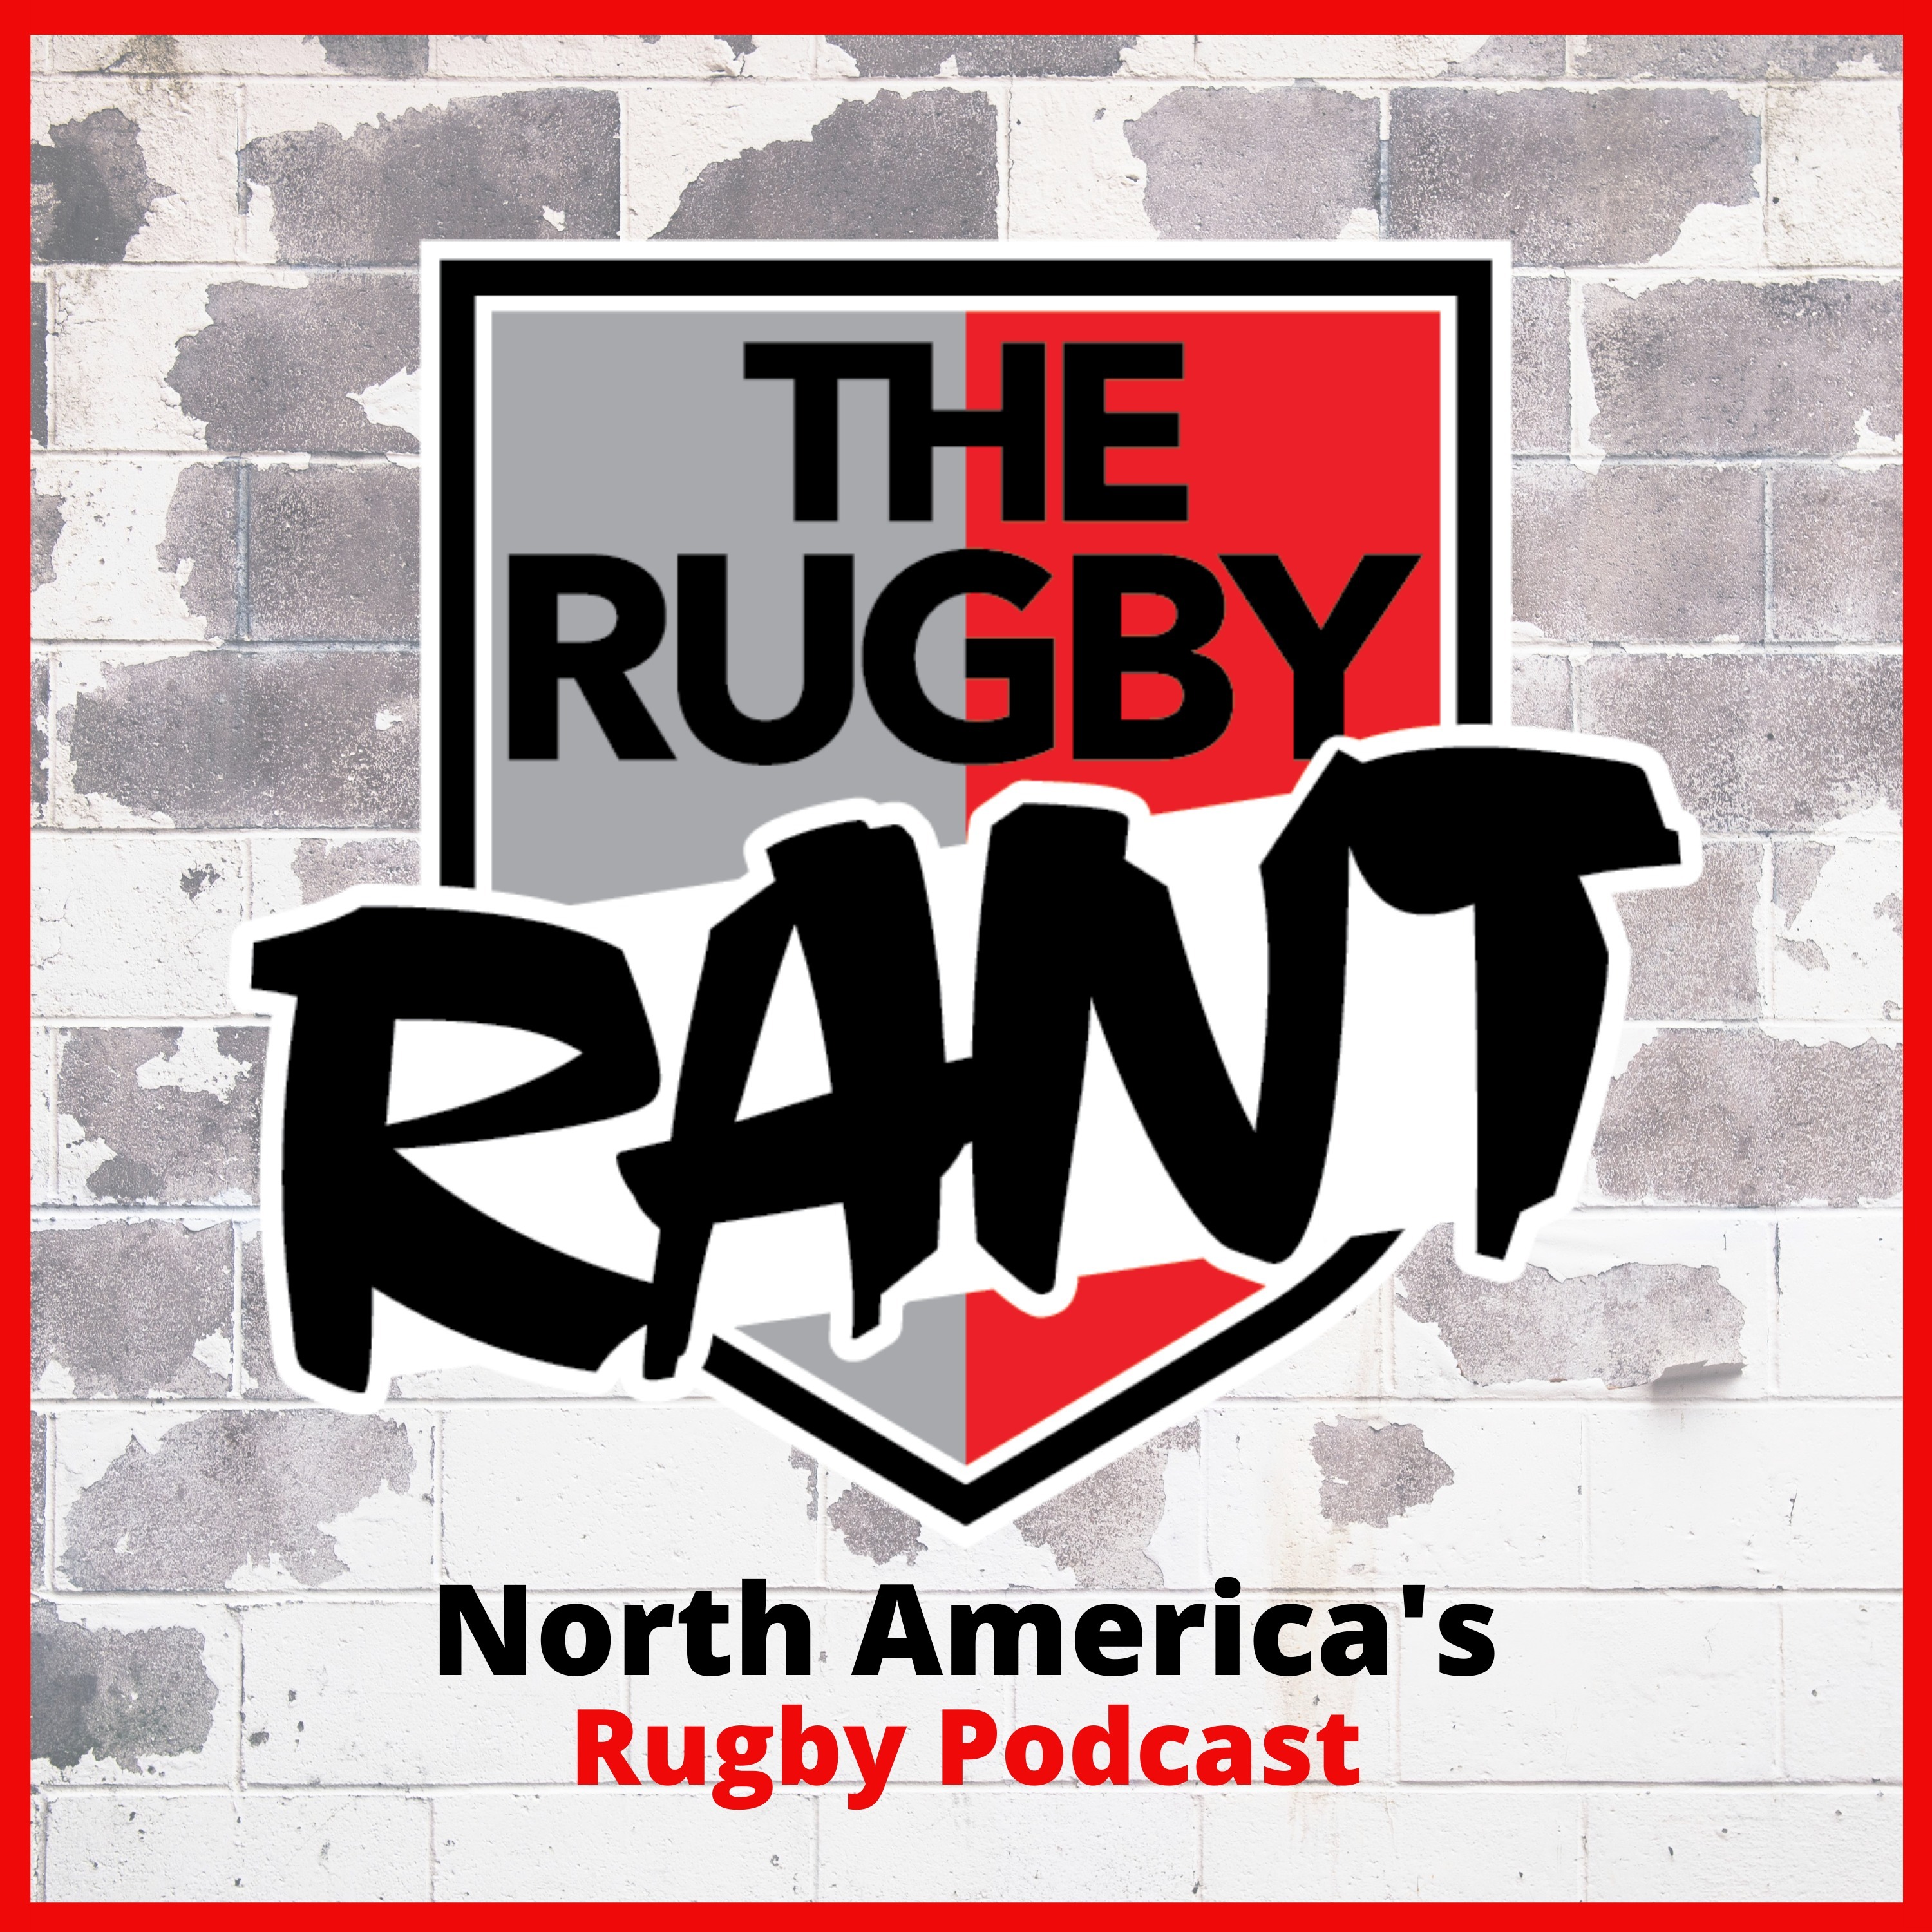 The Rugby Rant - Run, Pass or Kick with Nick Boyer